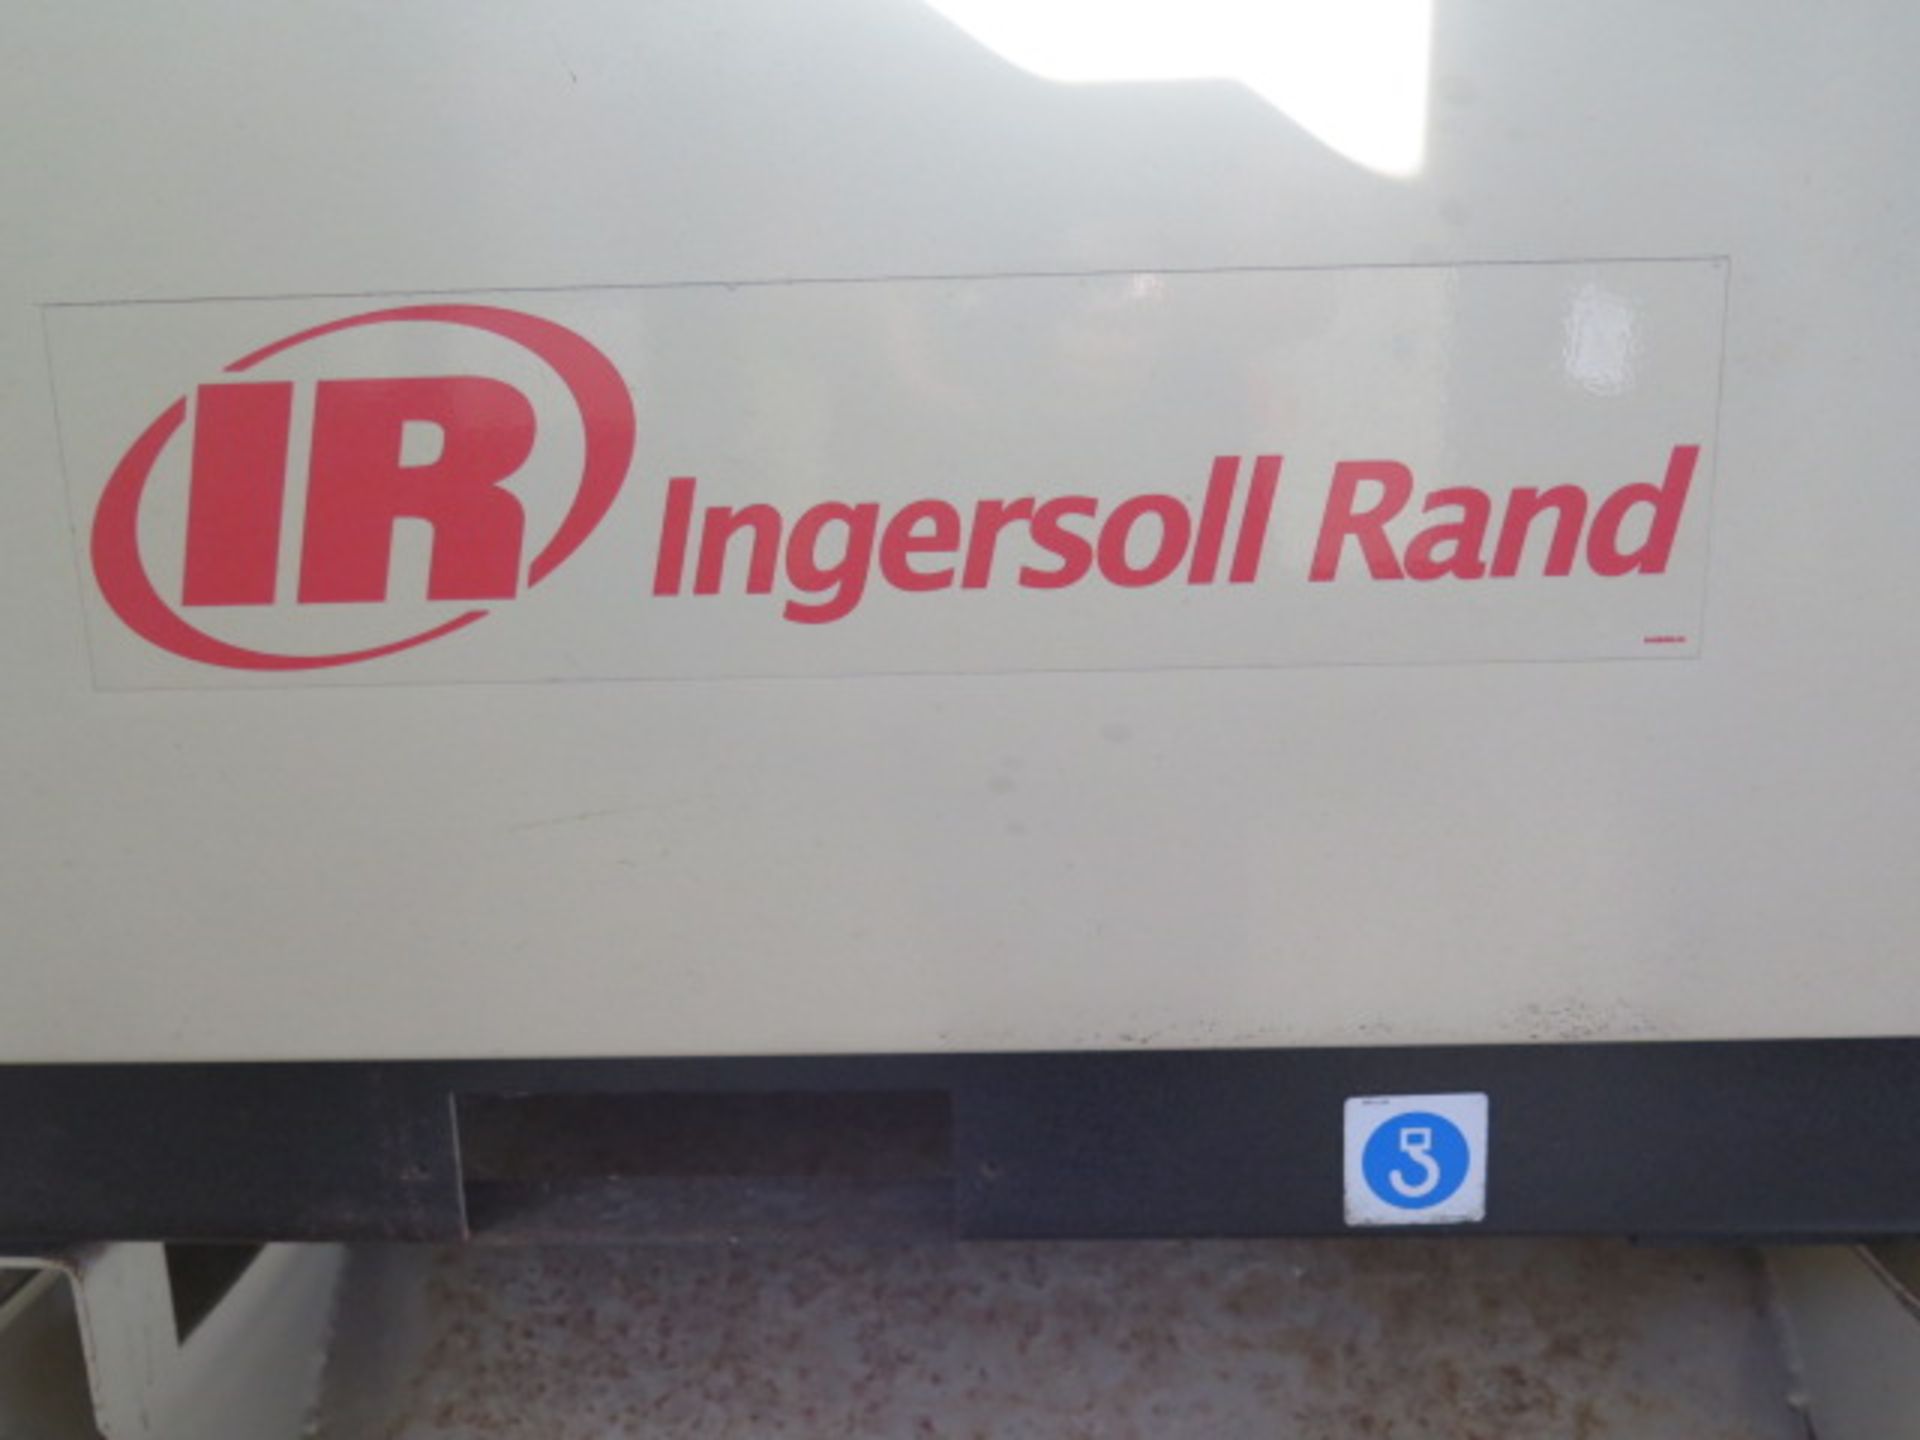 2007 Ingersoll Rand SSR-UP6-30-125 30Hp Rotary Air Compressor / Dryer Combo s/n PX9880U08011 w/ - Image 6 of 7